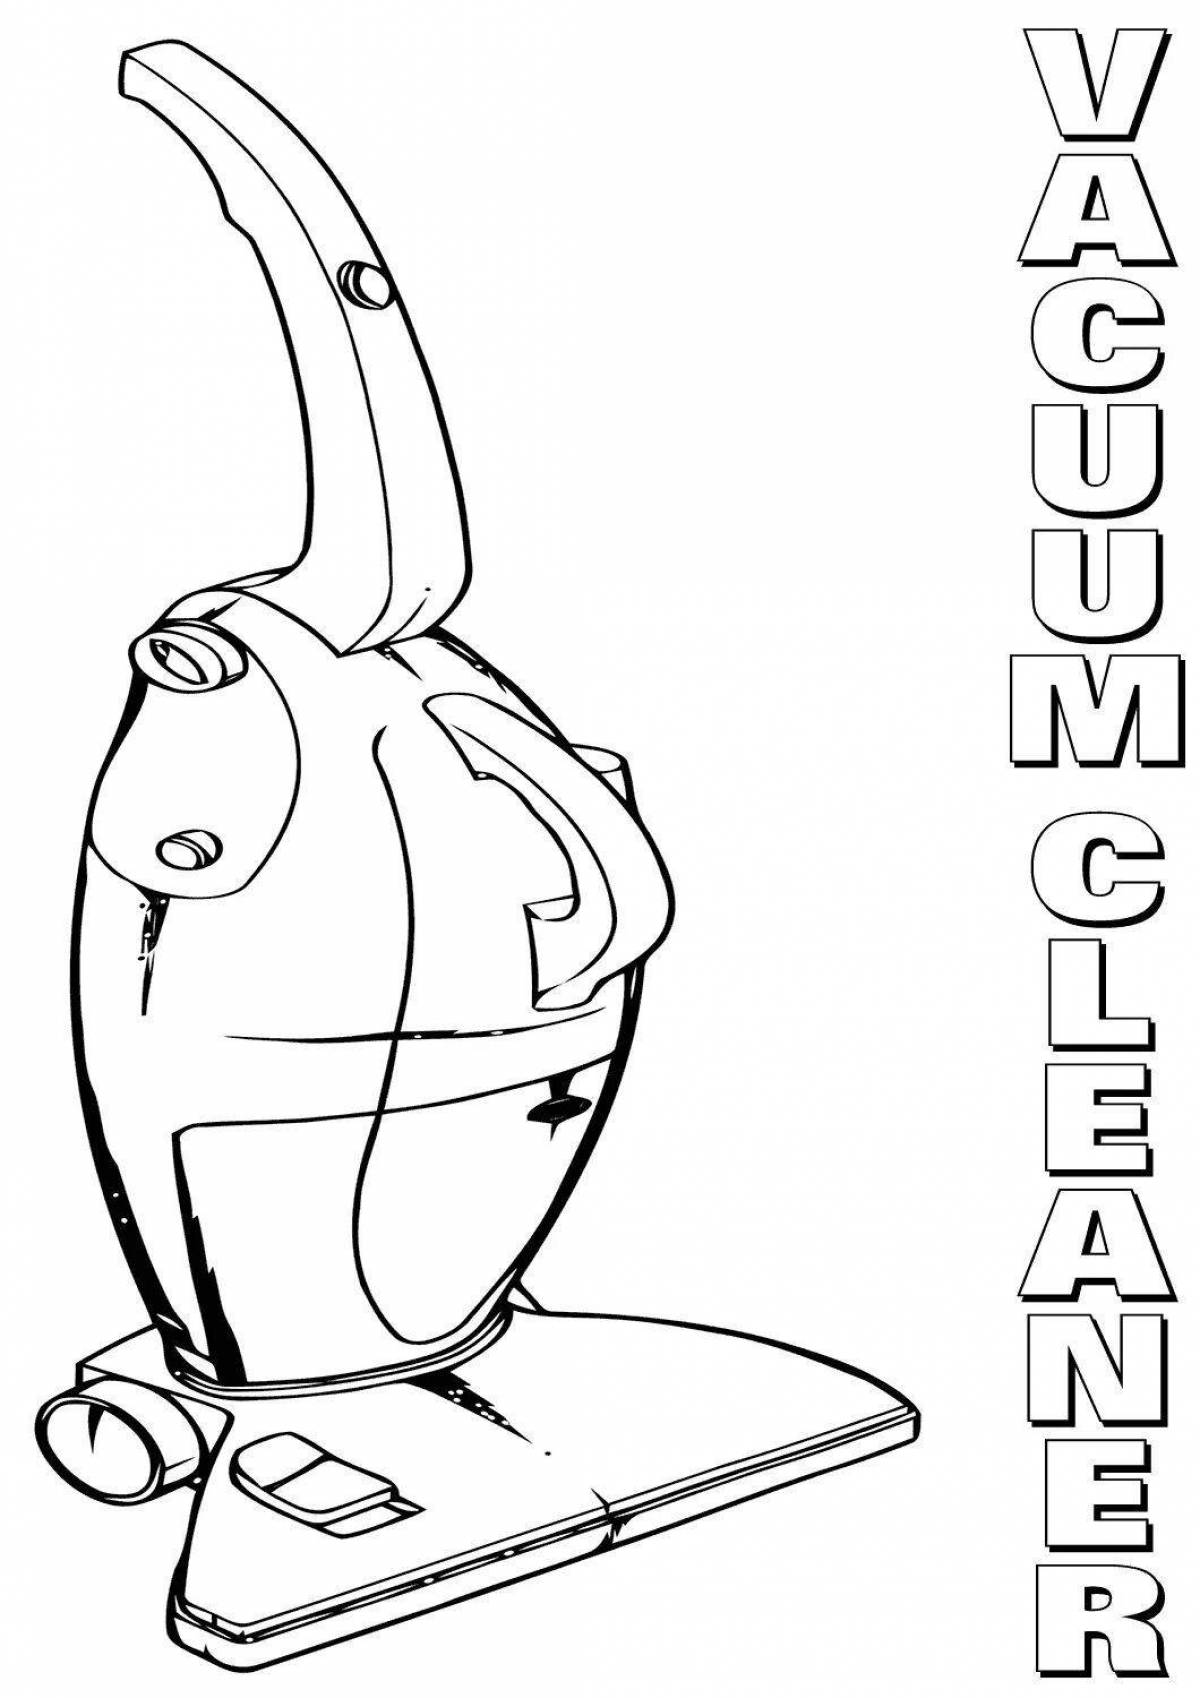 Coloring page playful robot vacuum cleaner